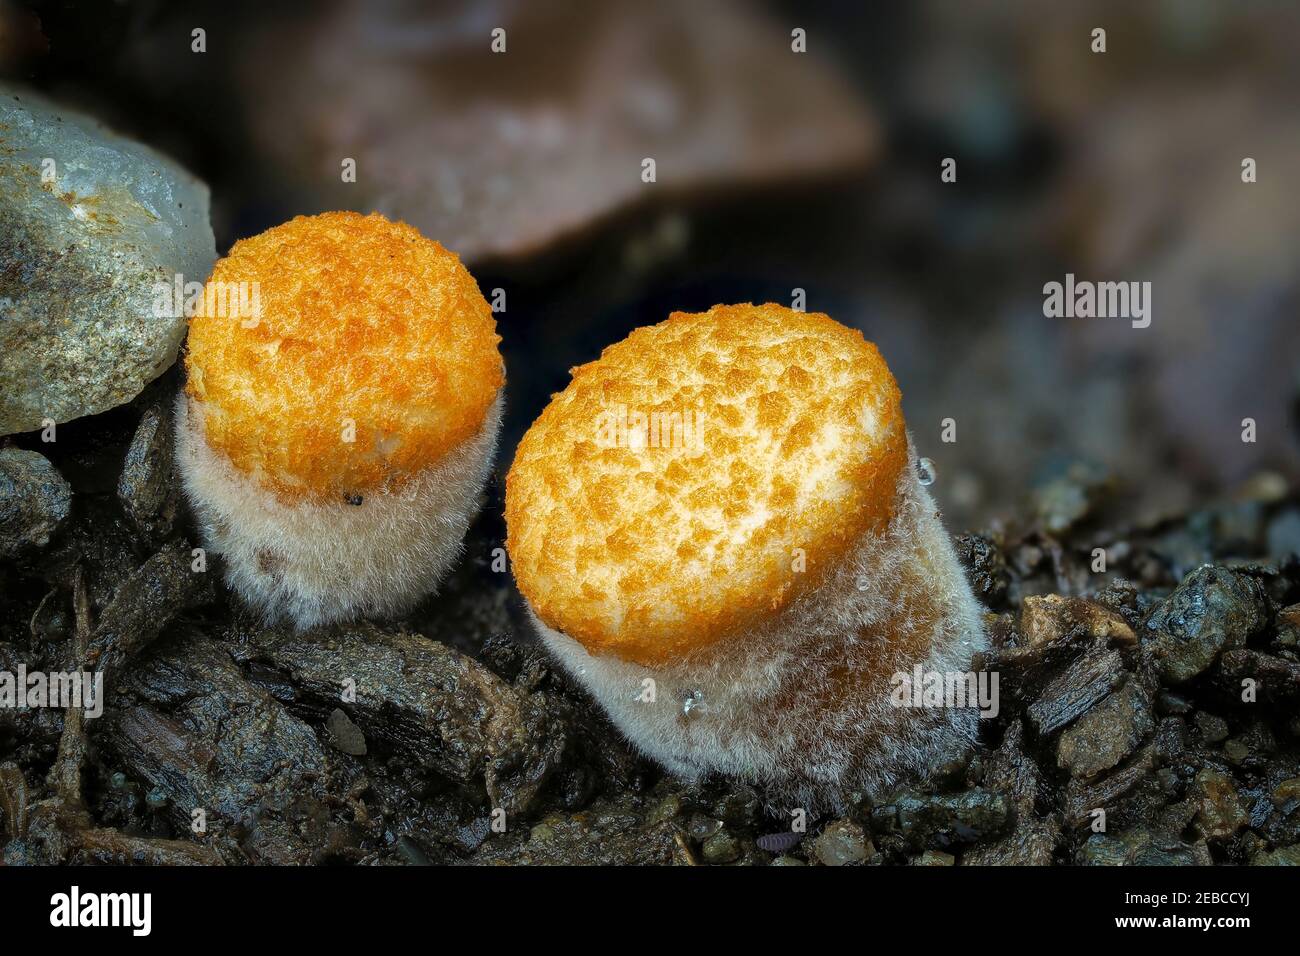 Crucibulum is a genus in the Nidulariaceae, a family of fungi whose fruiting bodies resemble tiny egg-filled birds nests. , an intresting photo Stock Photo